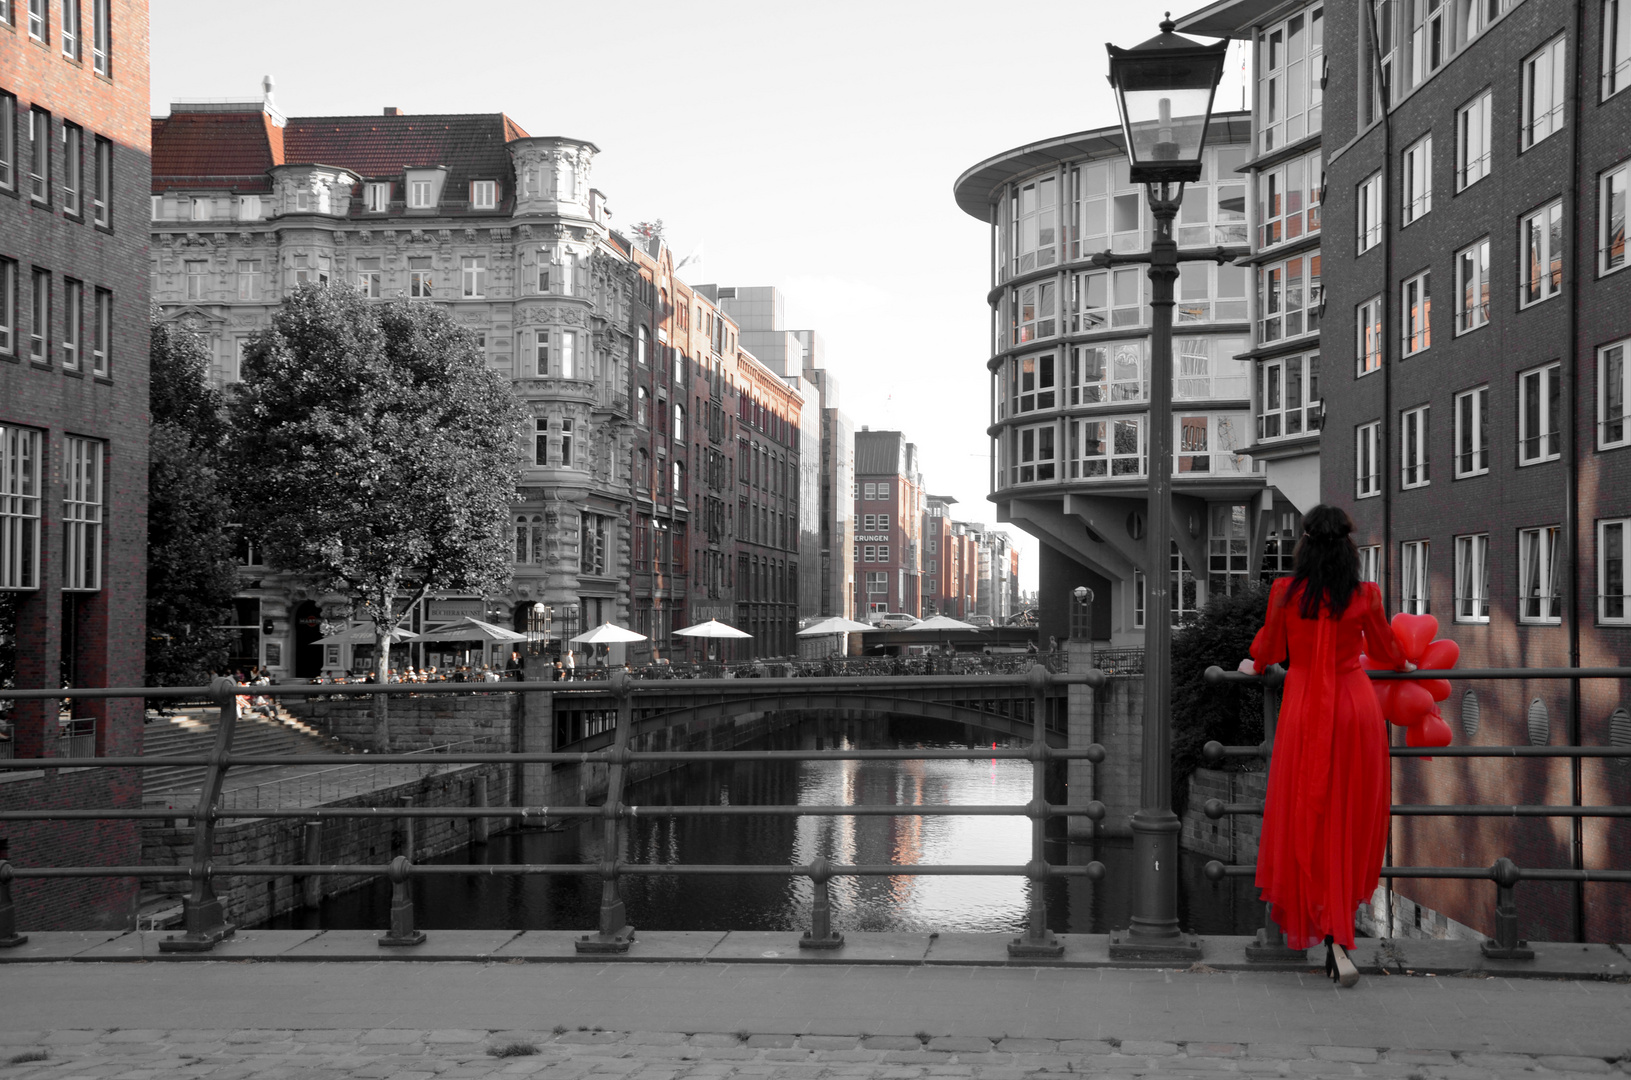 Woman in red